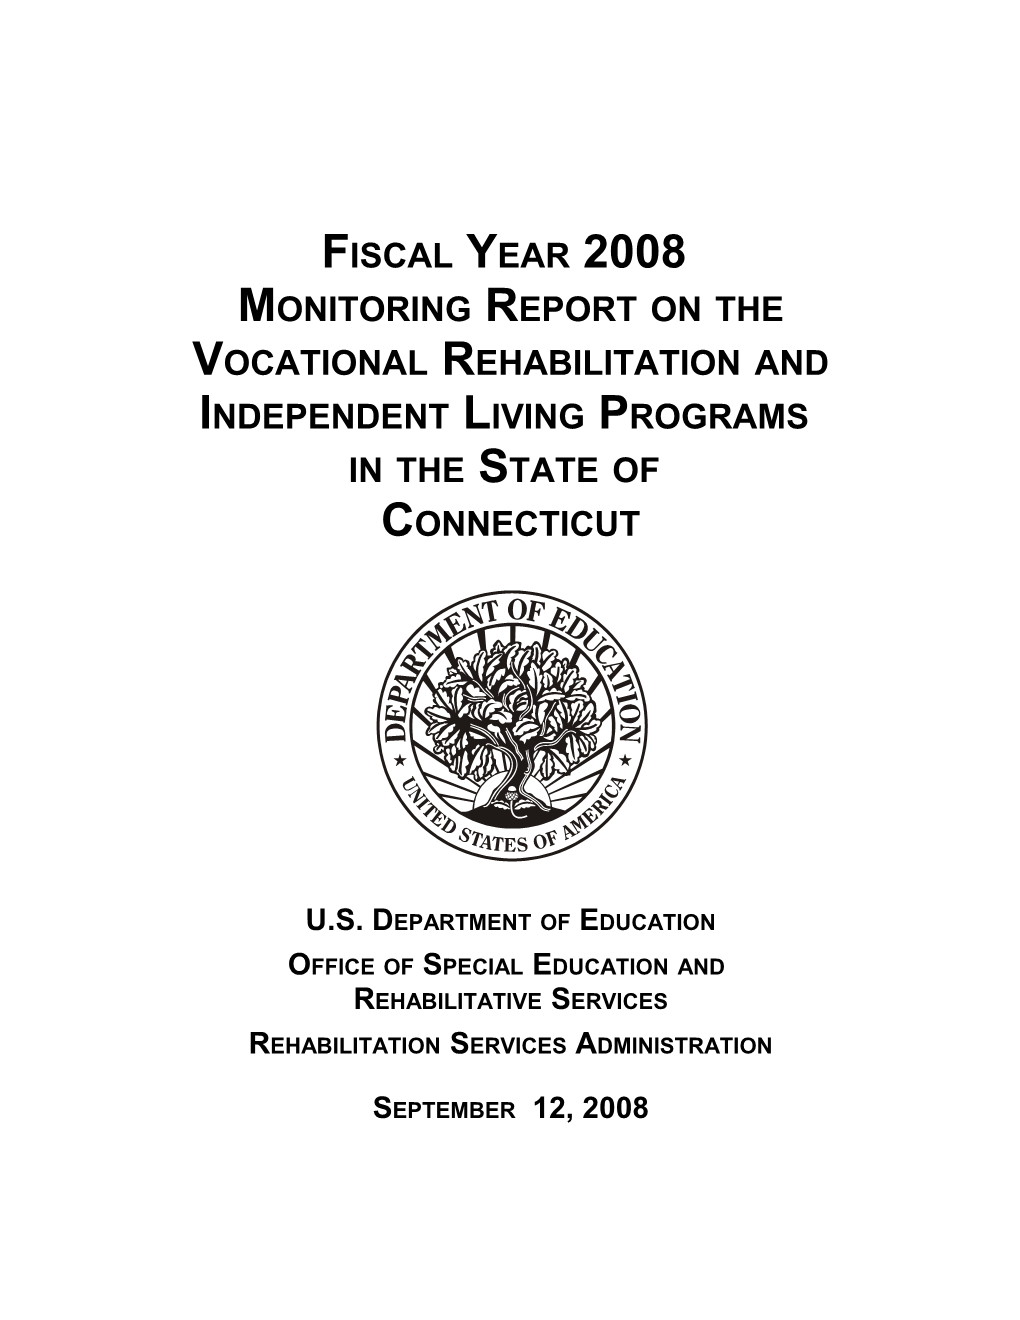 Fiscal Year 2008 Monitoring Report on the Vocational Rehabilitation and Independent Living s2